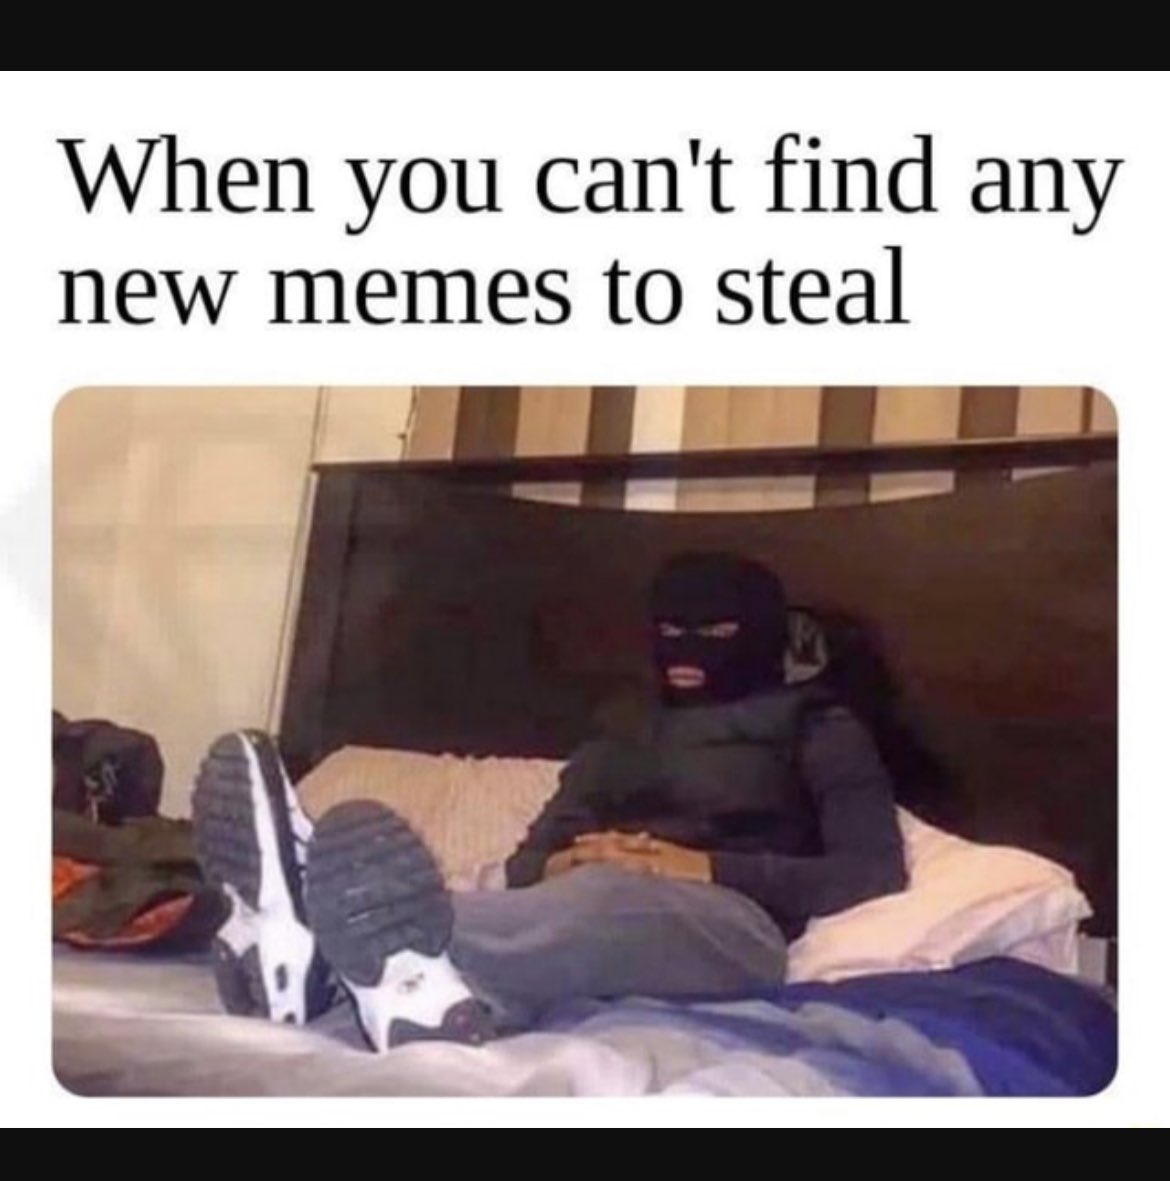 @NoContextHumans Just looking for memes 😎😎